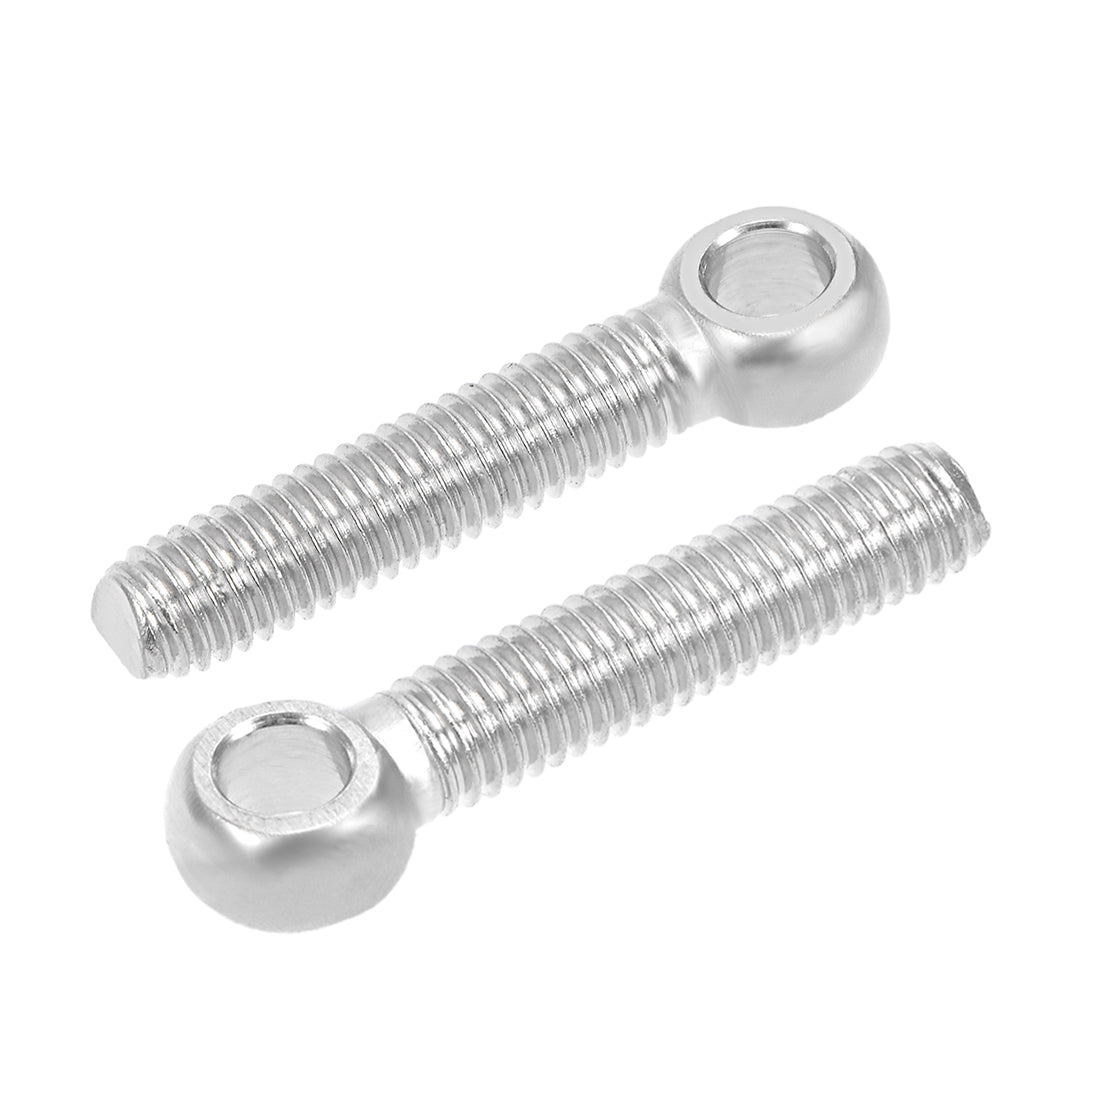 uxcell Uxcell M x mm 304 Stainless Steel Machine Lift Eye Bolt Rigging 10pcs